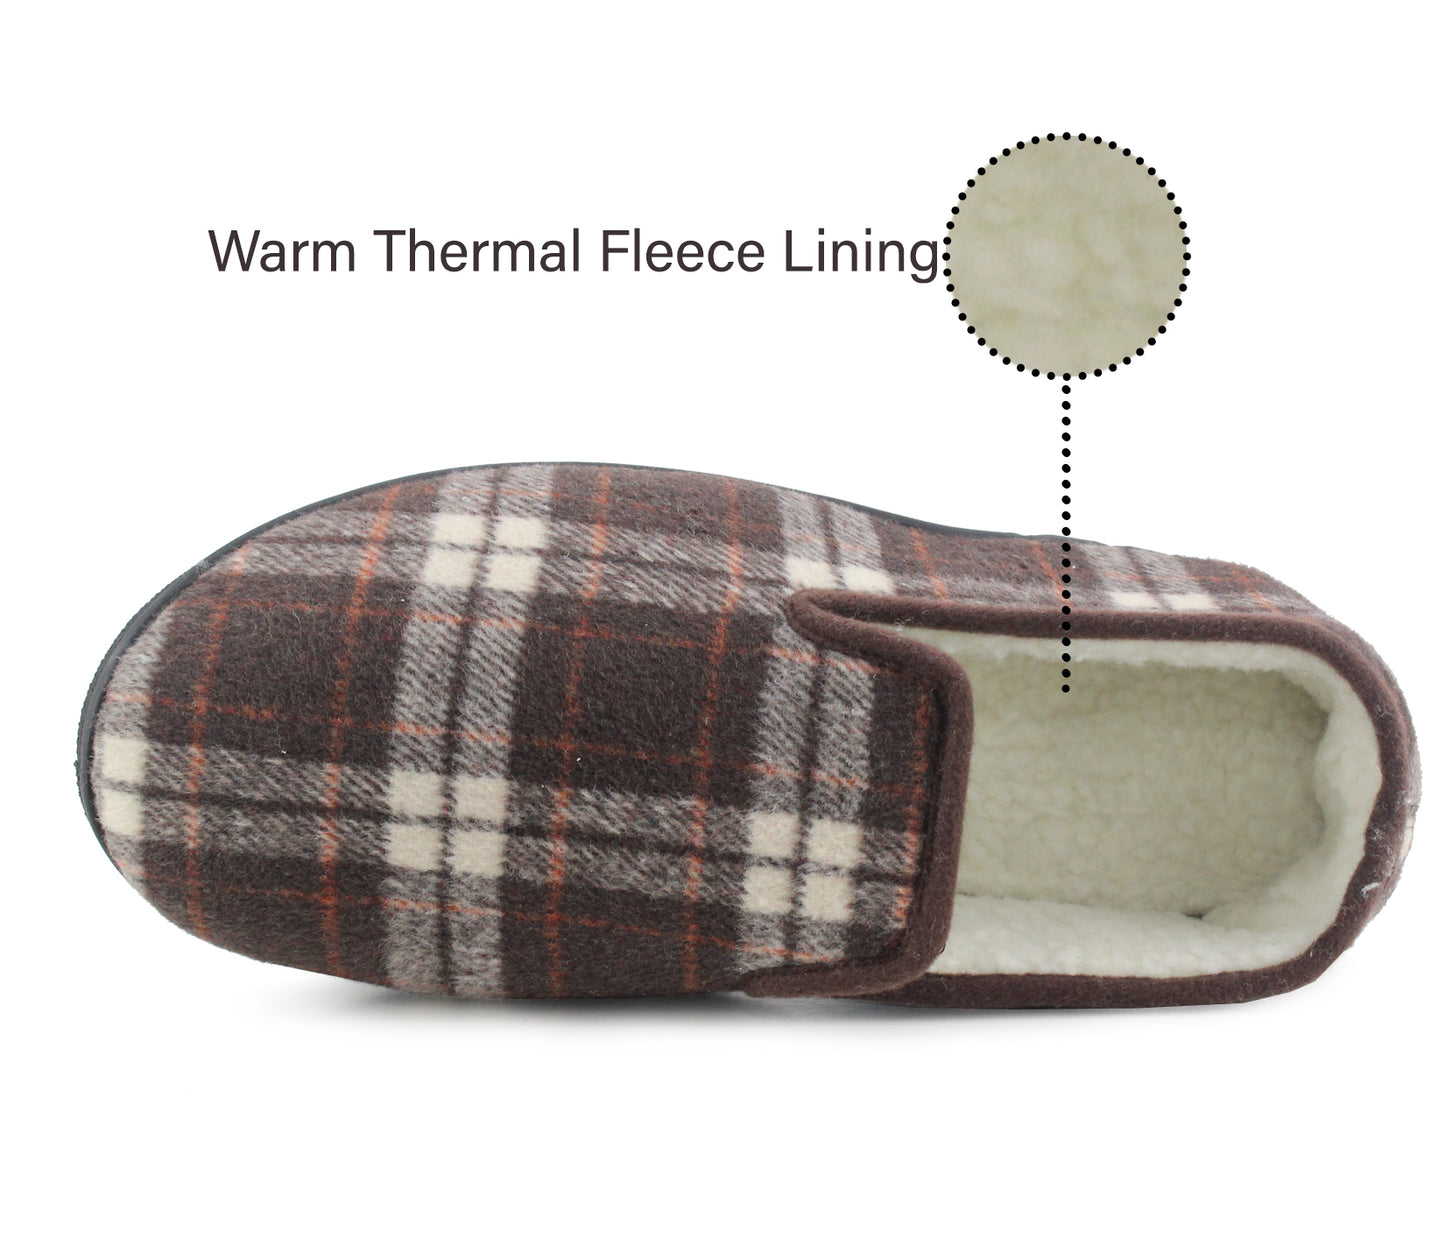 B568243 Mens Fleece Lined Check Winter Slippers in Brown